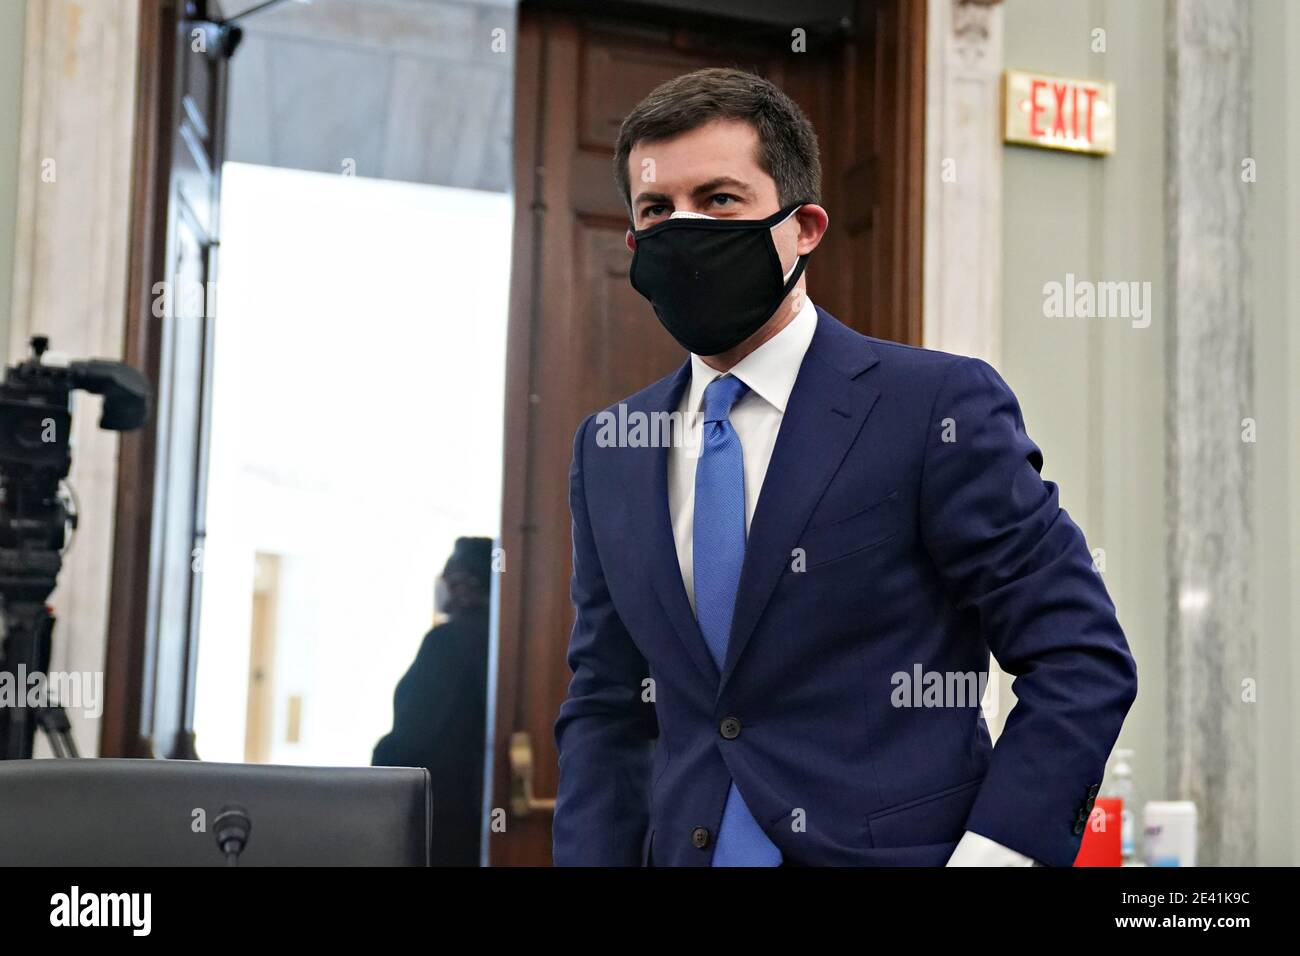 Pete Buttigieg, U.S. secretary of transportation nominee for U.S. President Joe Biden, wears a protective mask while arriving to a Senate Commerce, Science and Transportation Committee confirmation hearing in Washington, DC, U.S., on Thursday, Jan. 21, 2021. Buttigieg, is pledging to carry out the administration's ambitious agenda to rebuild the nation's infrastructure, calling it a 'generational opportunity' to create new jobs, fight economic inequality and stem climate change. Credit: Stefani Reynolds/Pool via CNP | usage worldwide Stock Photo